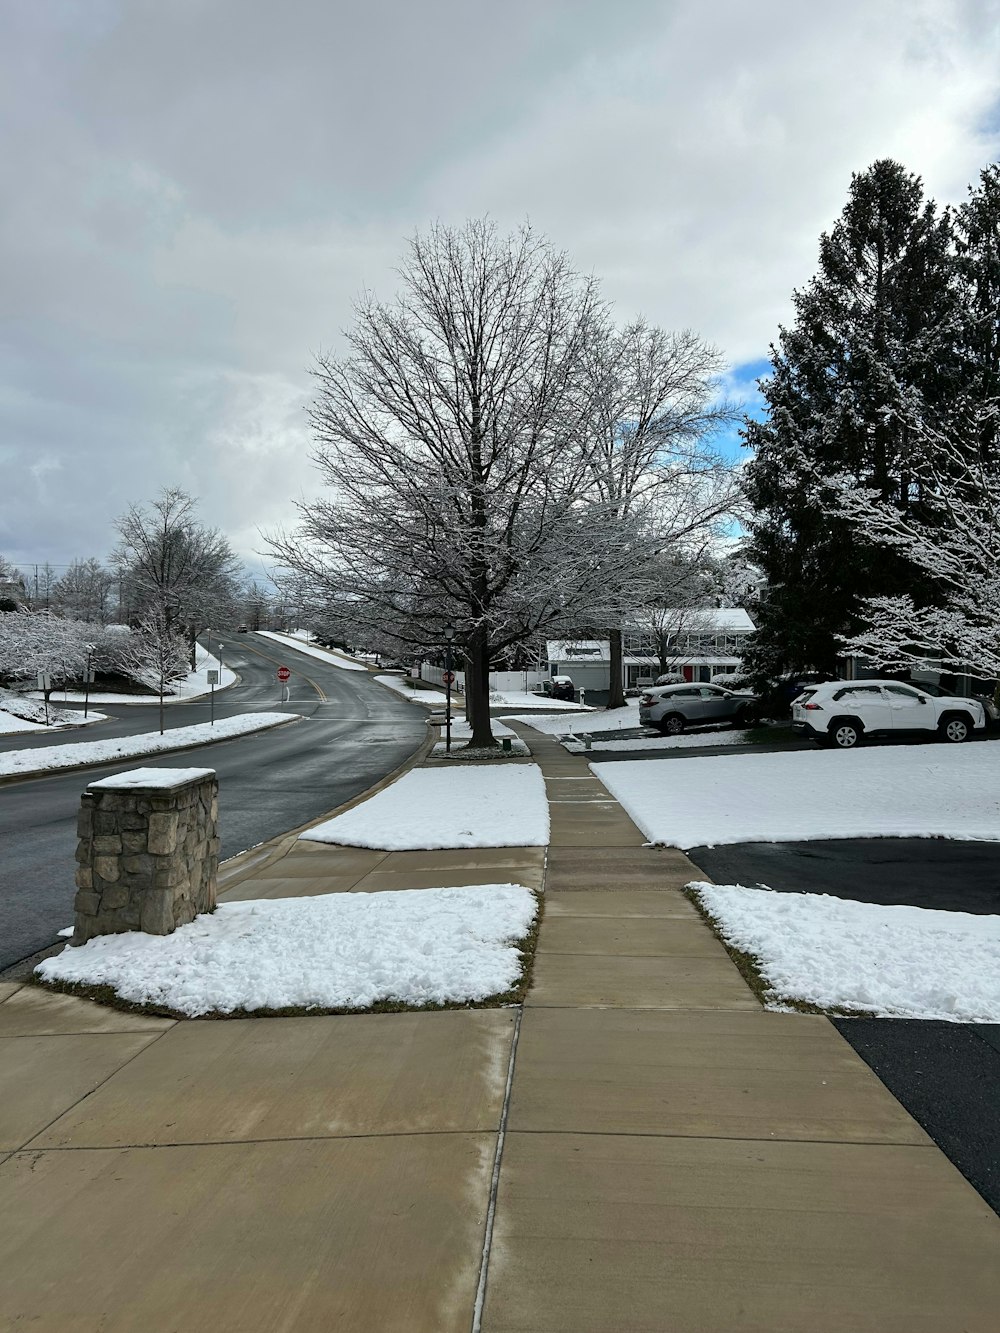 a sidewalk with snow on the ground and cars parked on the side of the road